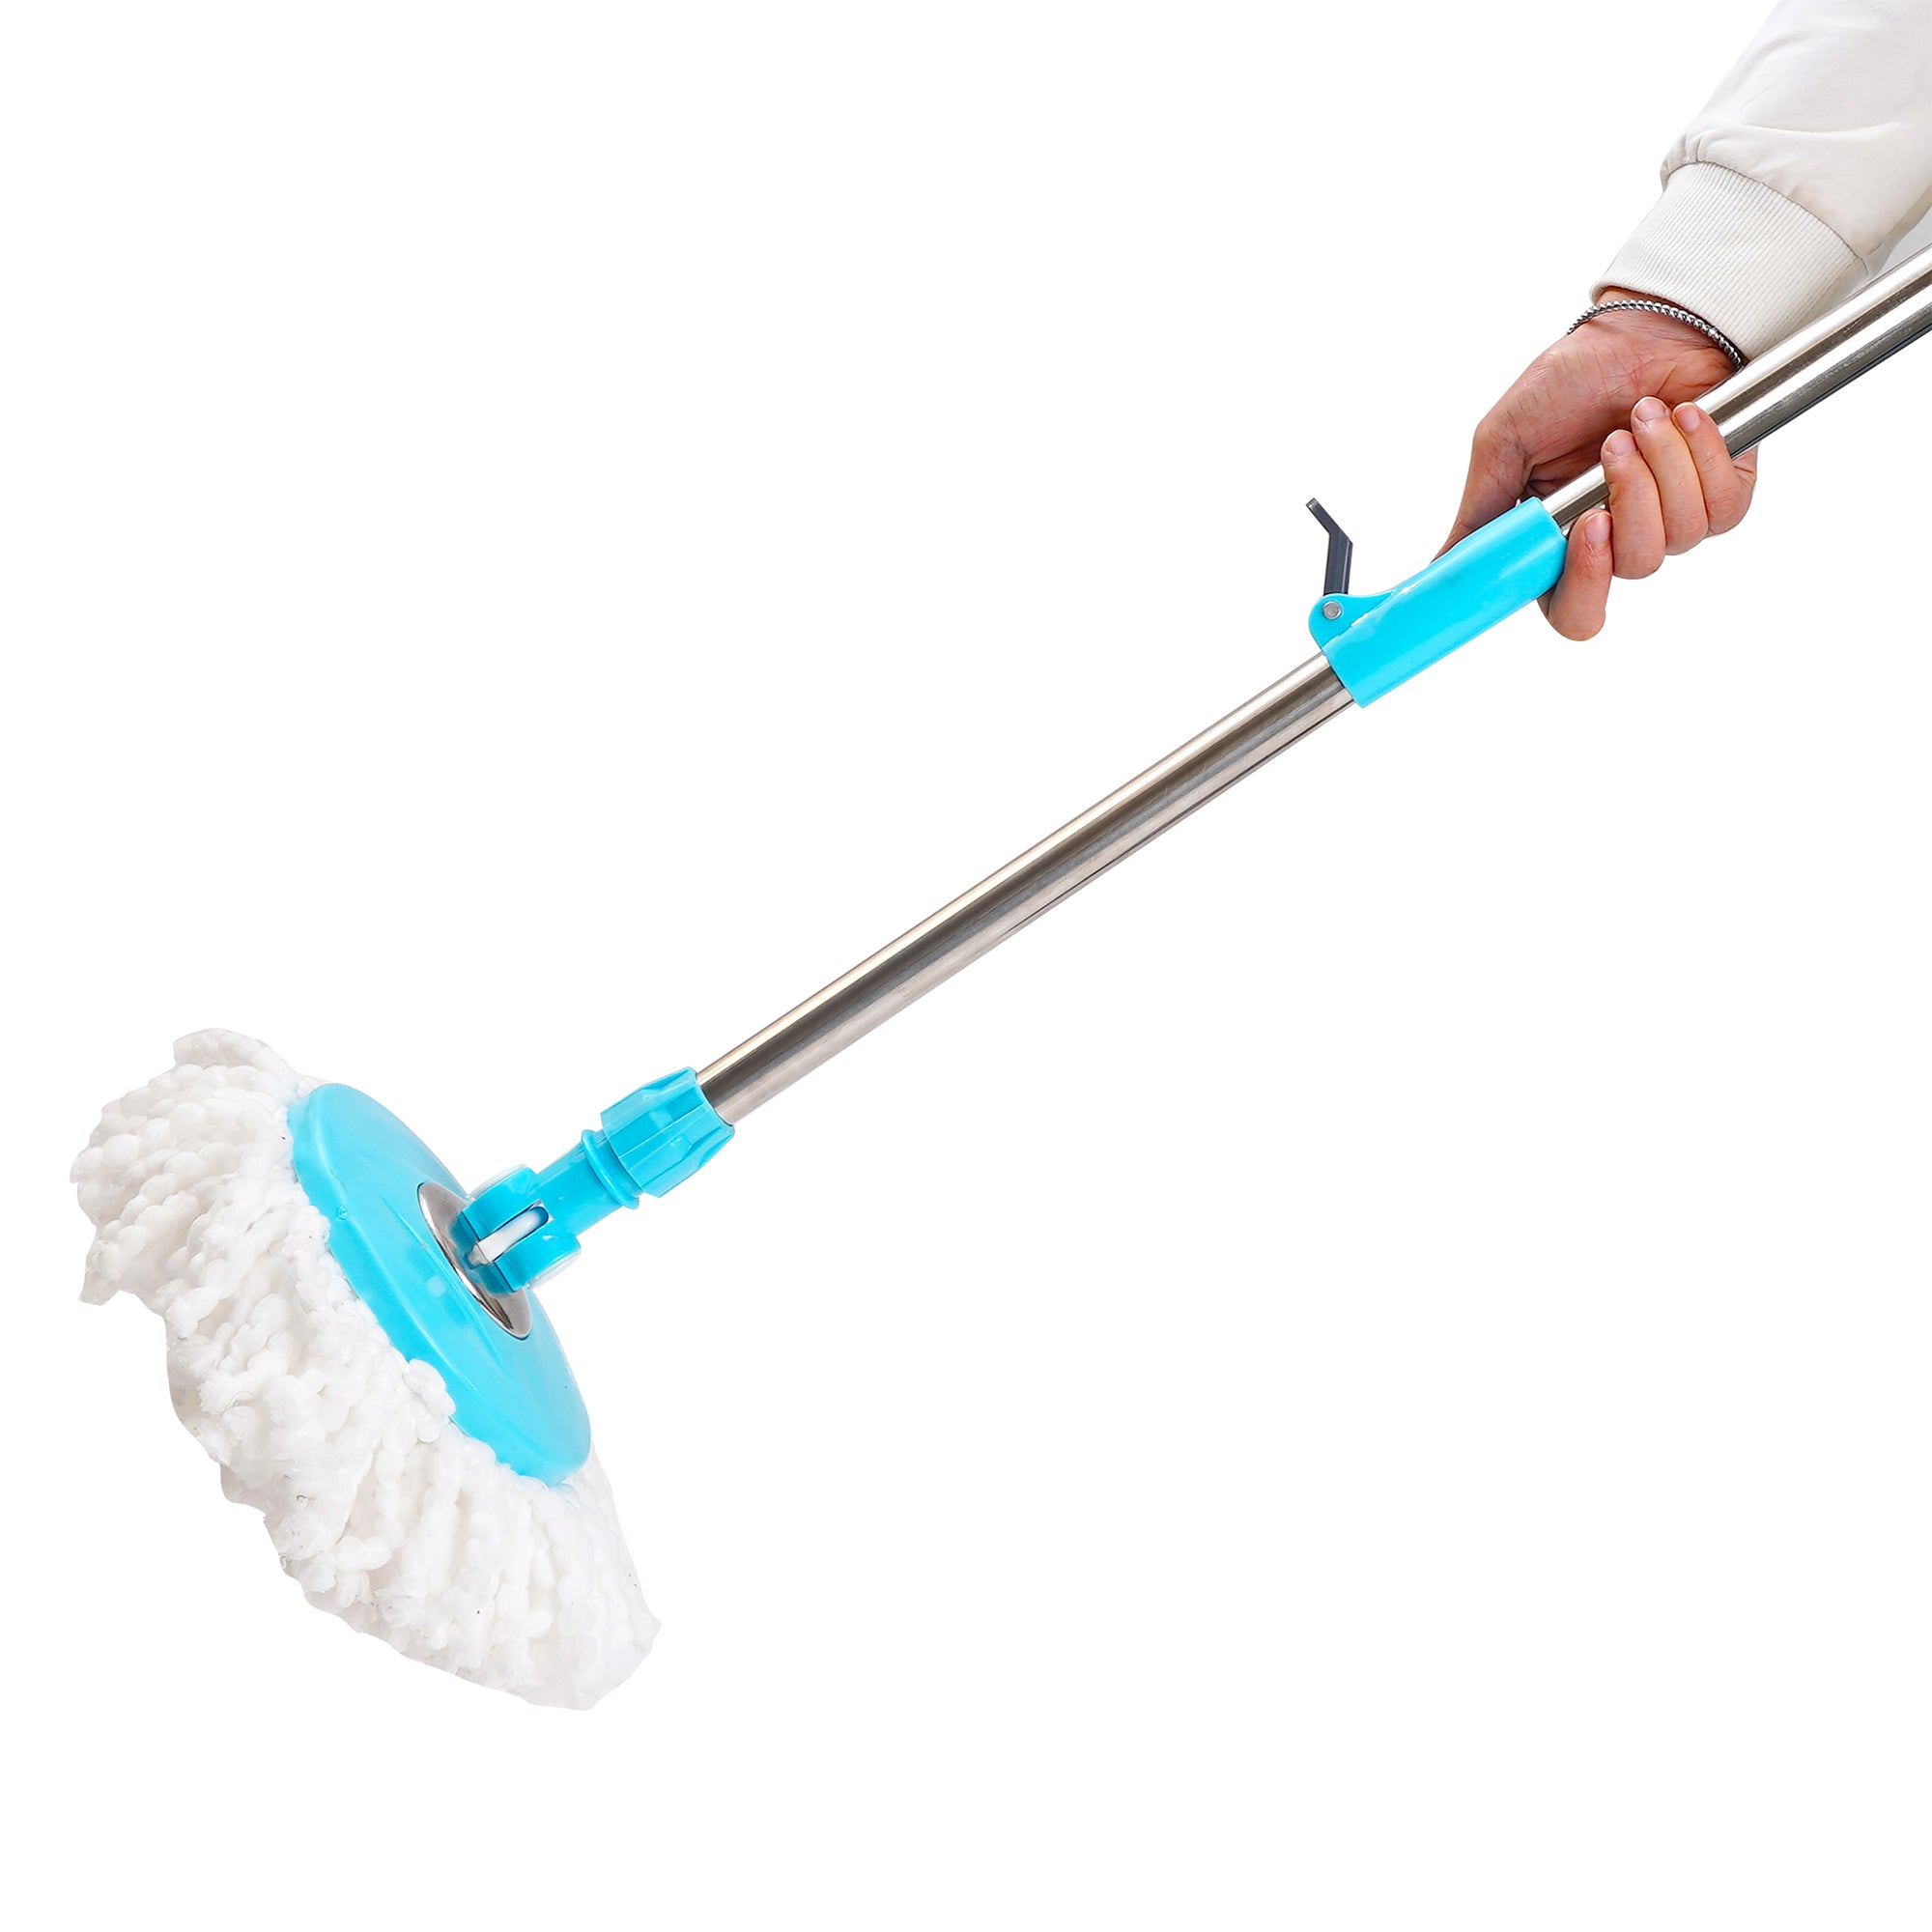 LivingBasics Mop Stick for Floor Cleaning with Microfiber Refill 360 Rotating Telescopic Rod/Handle/Pole Disc for Easy Wring Rinse Clean Spin Mop Accessories for Home, Office and Commercial Use